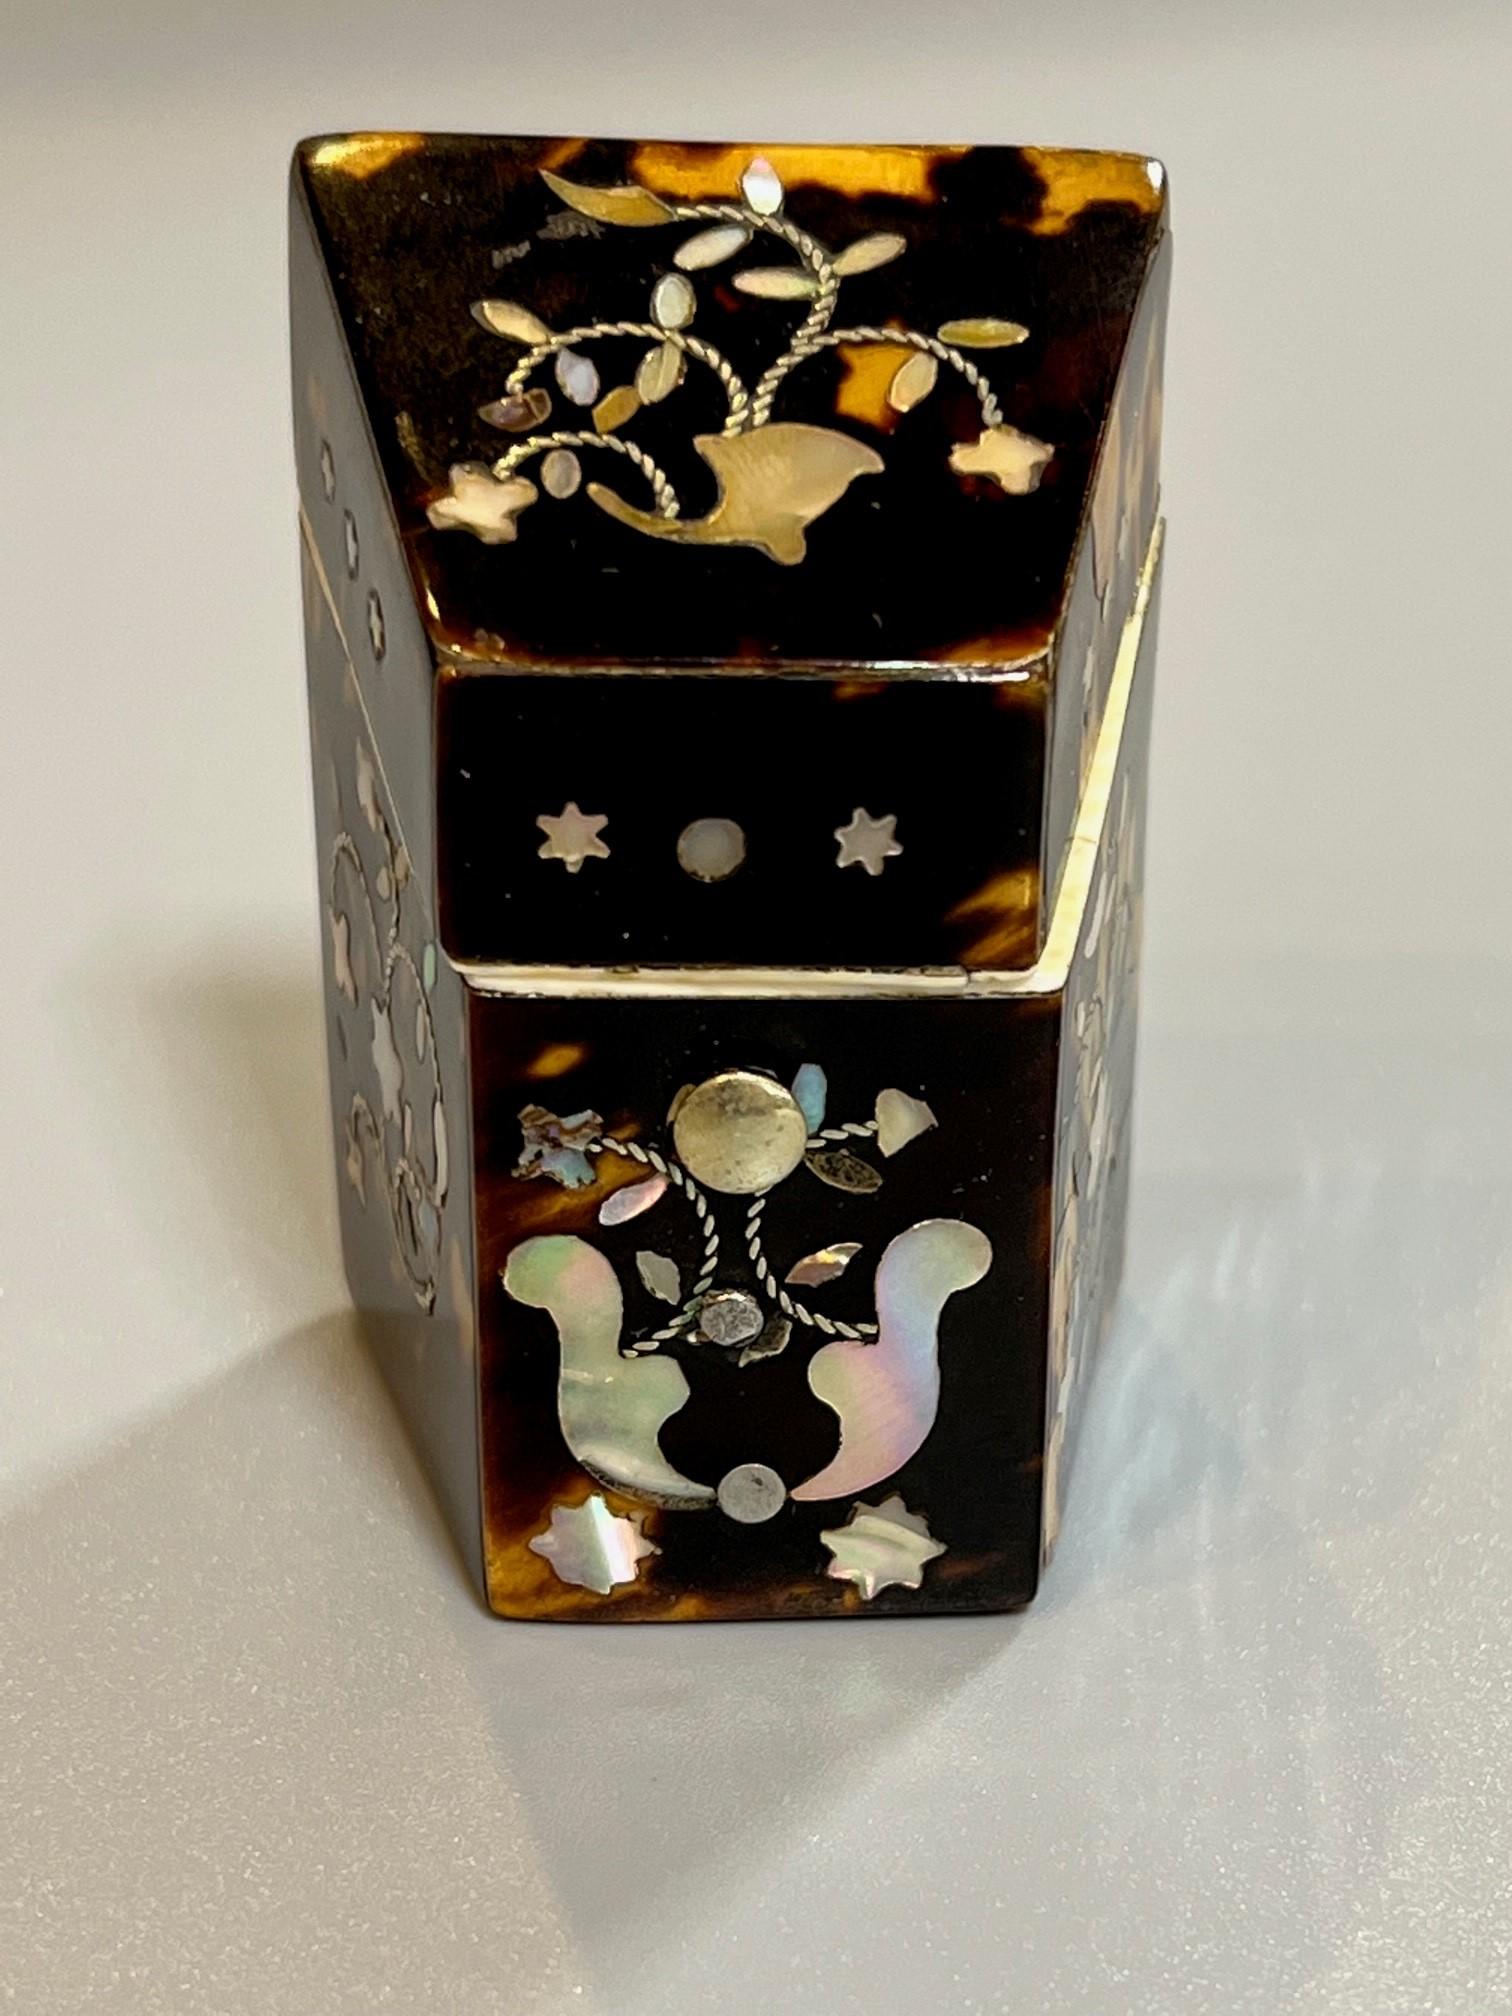 Late 19th century tortoise shell needle case with a mother of pearl inlay. A knife box shape with a hinged lid and a package of the original needles in the original packaging marked H. Milward & Sons registered Needle case Bevil Eyed No. 7. The